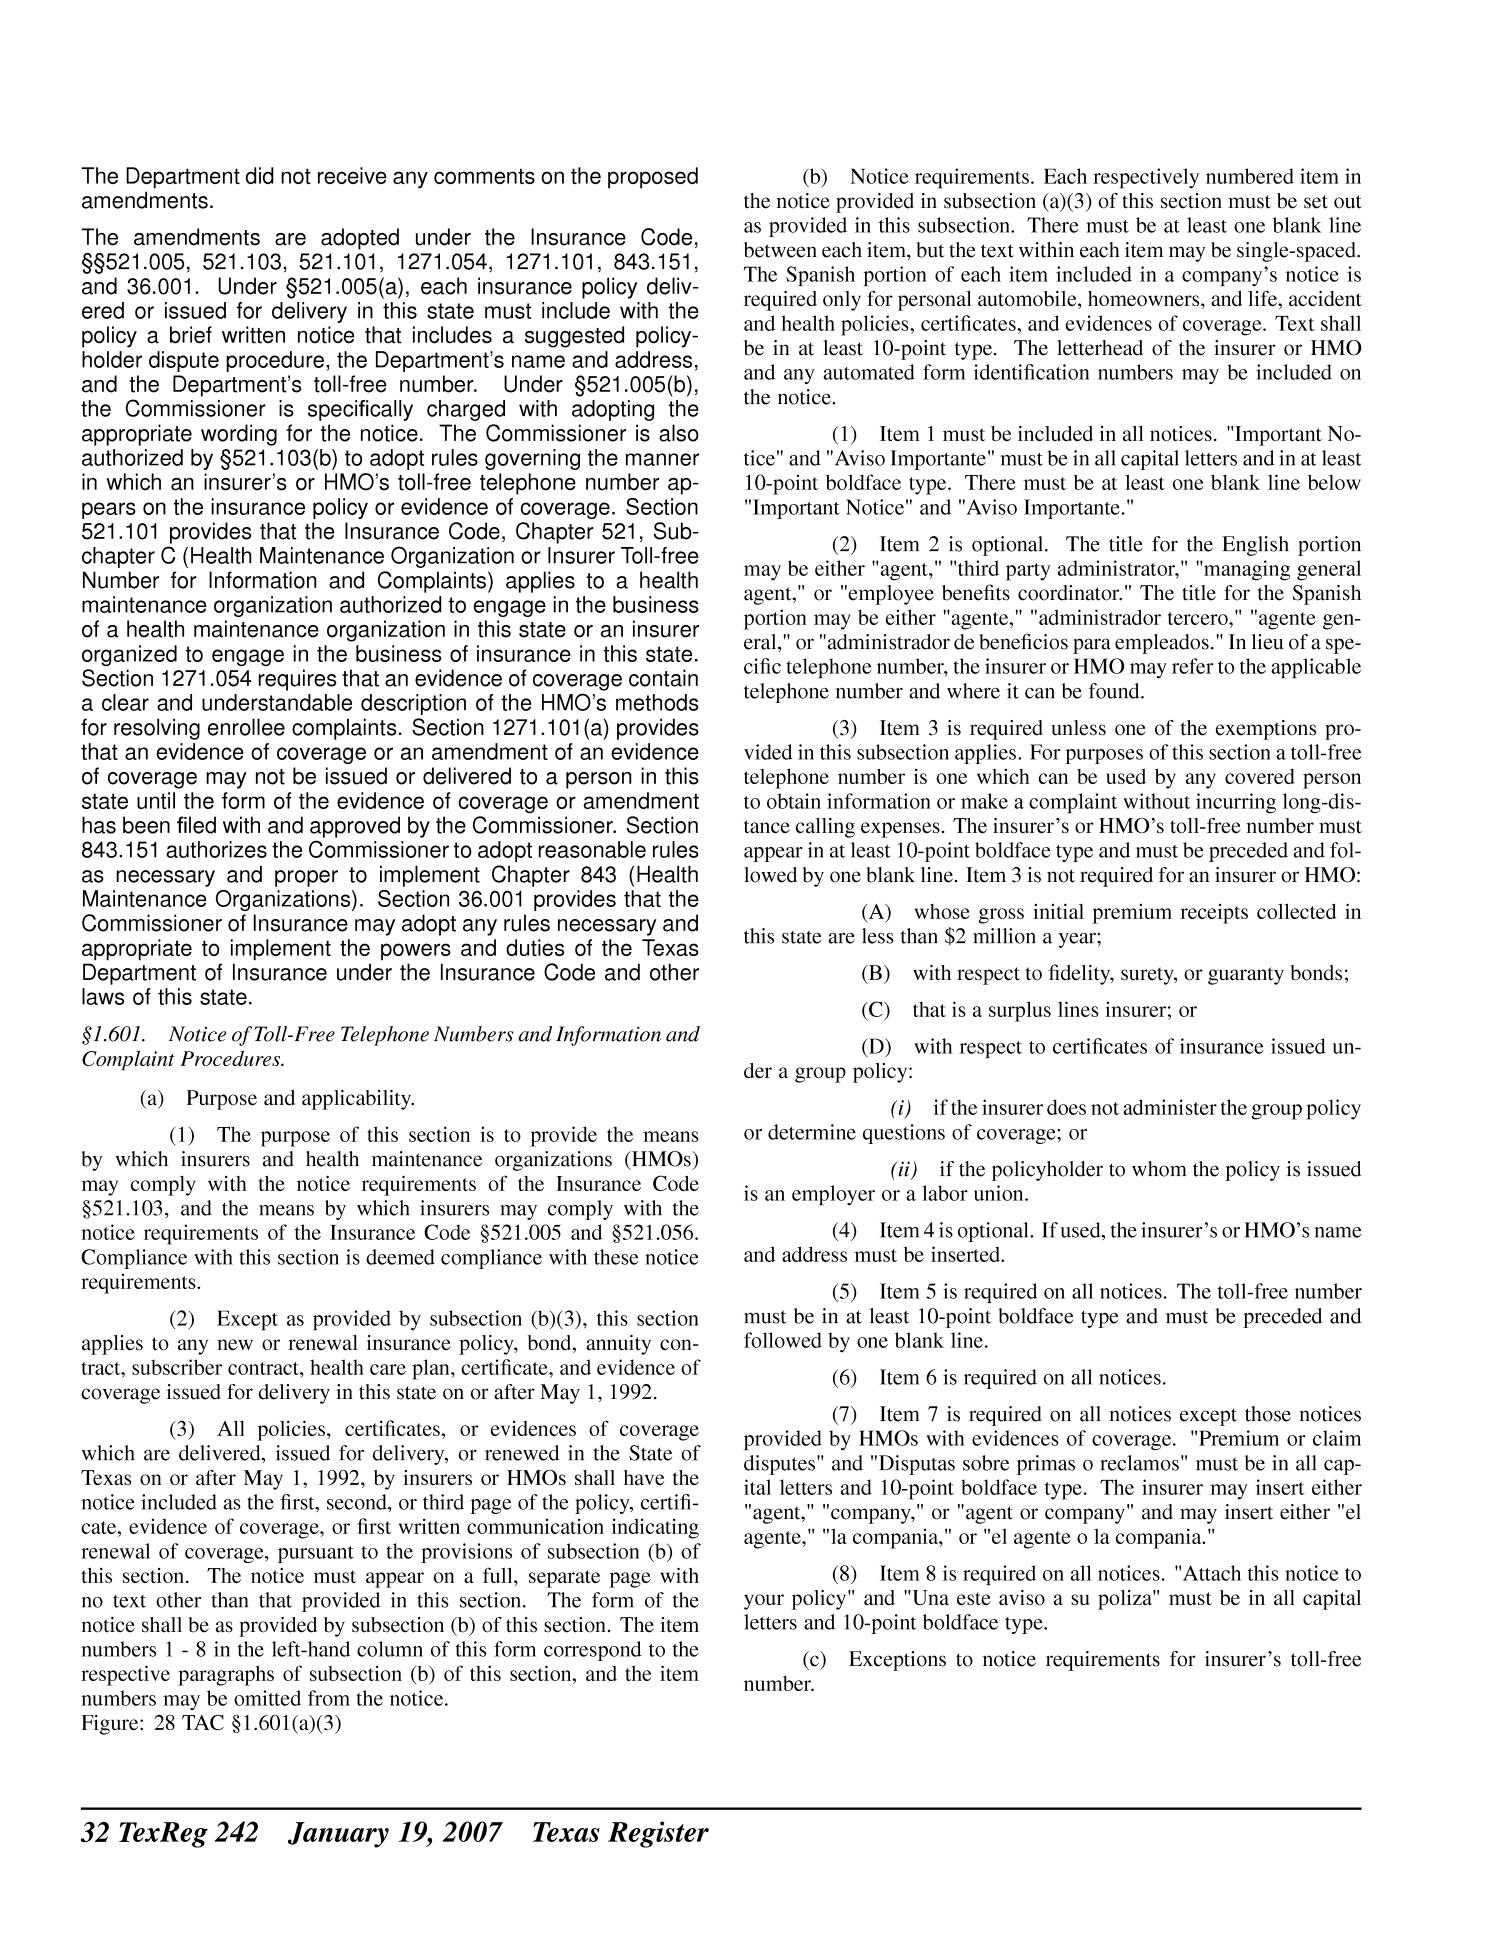 Texas Register, Volume 32, Number 3, Pages 215-274, January 19, 2007
                                                
                                                    242
                                                